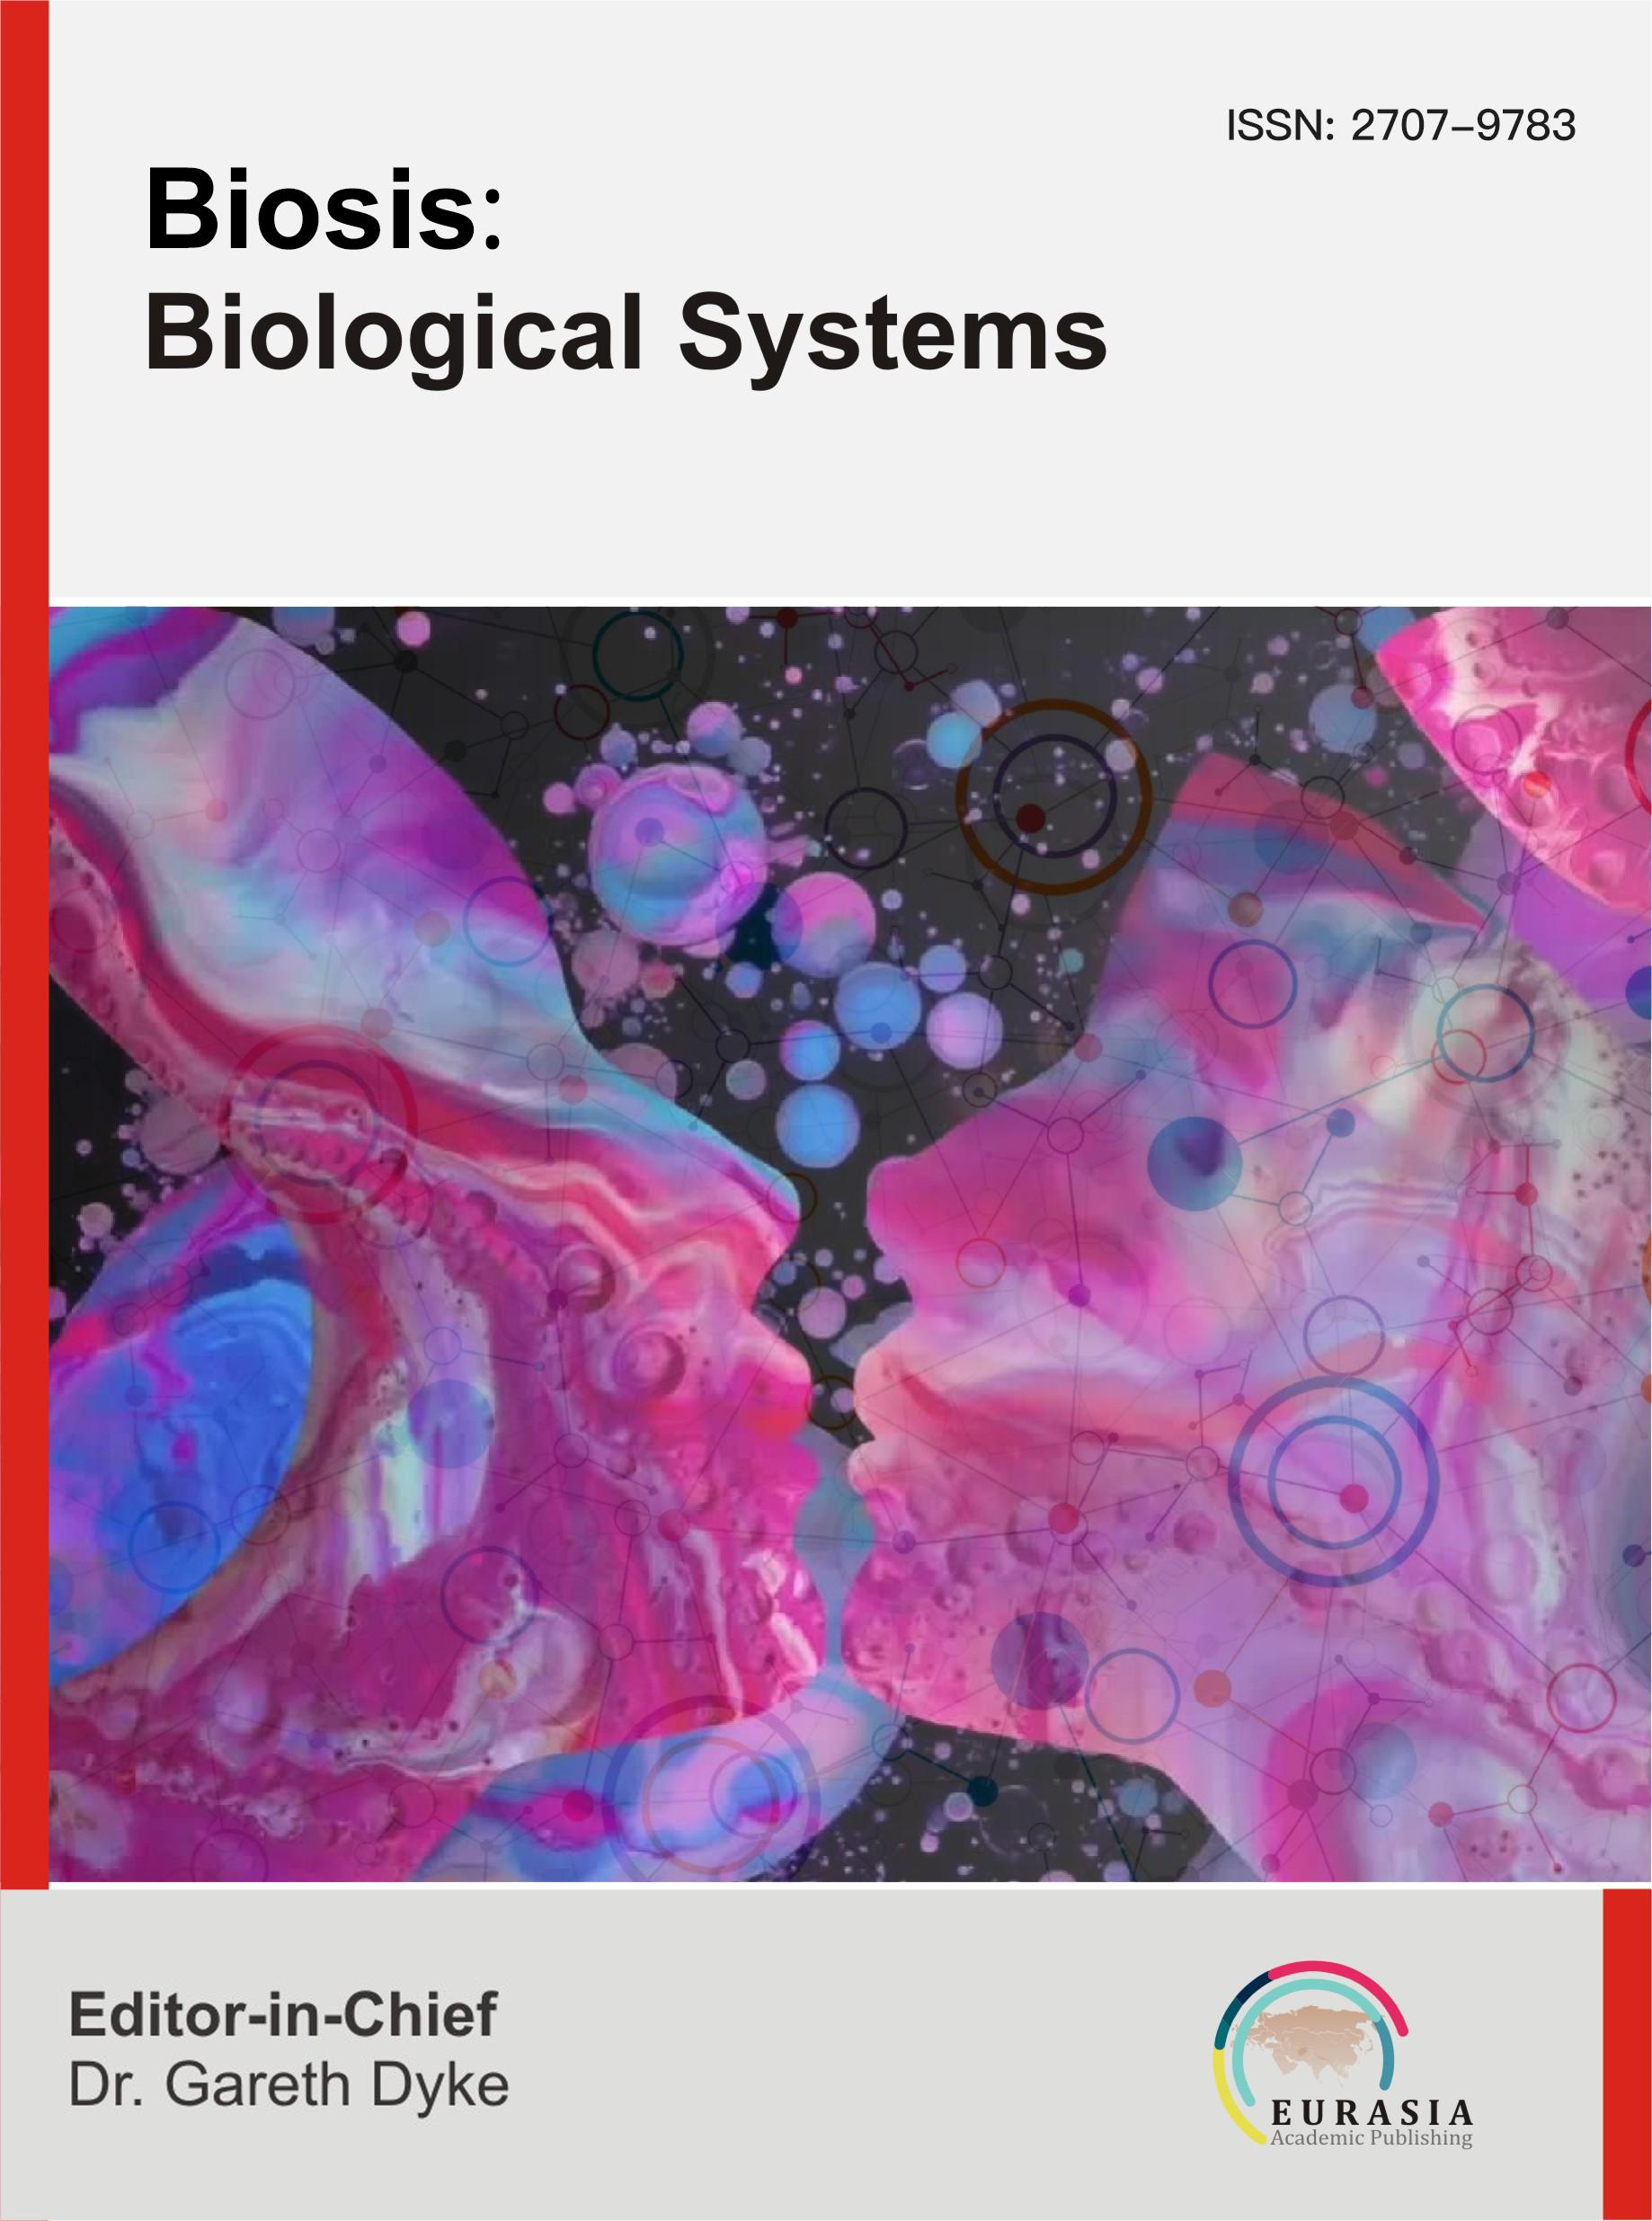 					View Vol. 2 No. 2 (2021): Biosis: Biological Systems
				